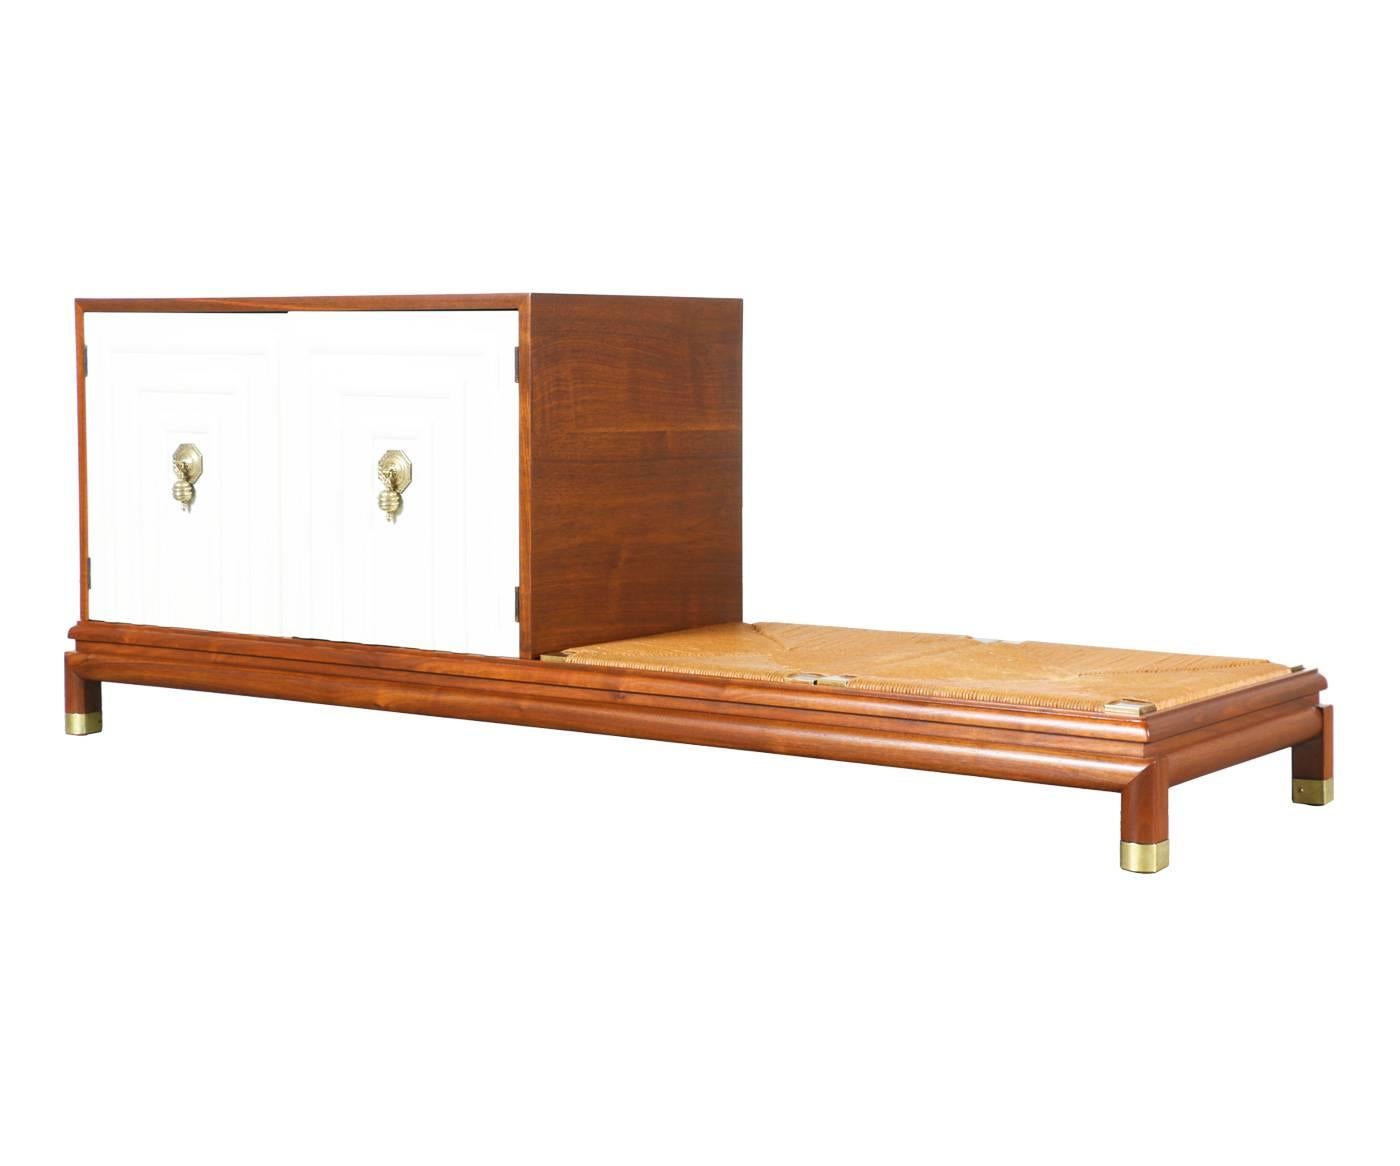 Designer: Renzo Rutili.
Manufacturer: Johnson Furniture.
Period/style: Mid-Century Modern.
Country: United States.
Date: 1960s.

Dimensions: 25″ H x 67.5″ L x 19″ W.
Materials: Walnut, lacquered wood, rush chord, brass.
Condition: Excellent,